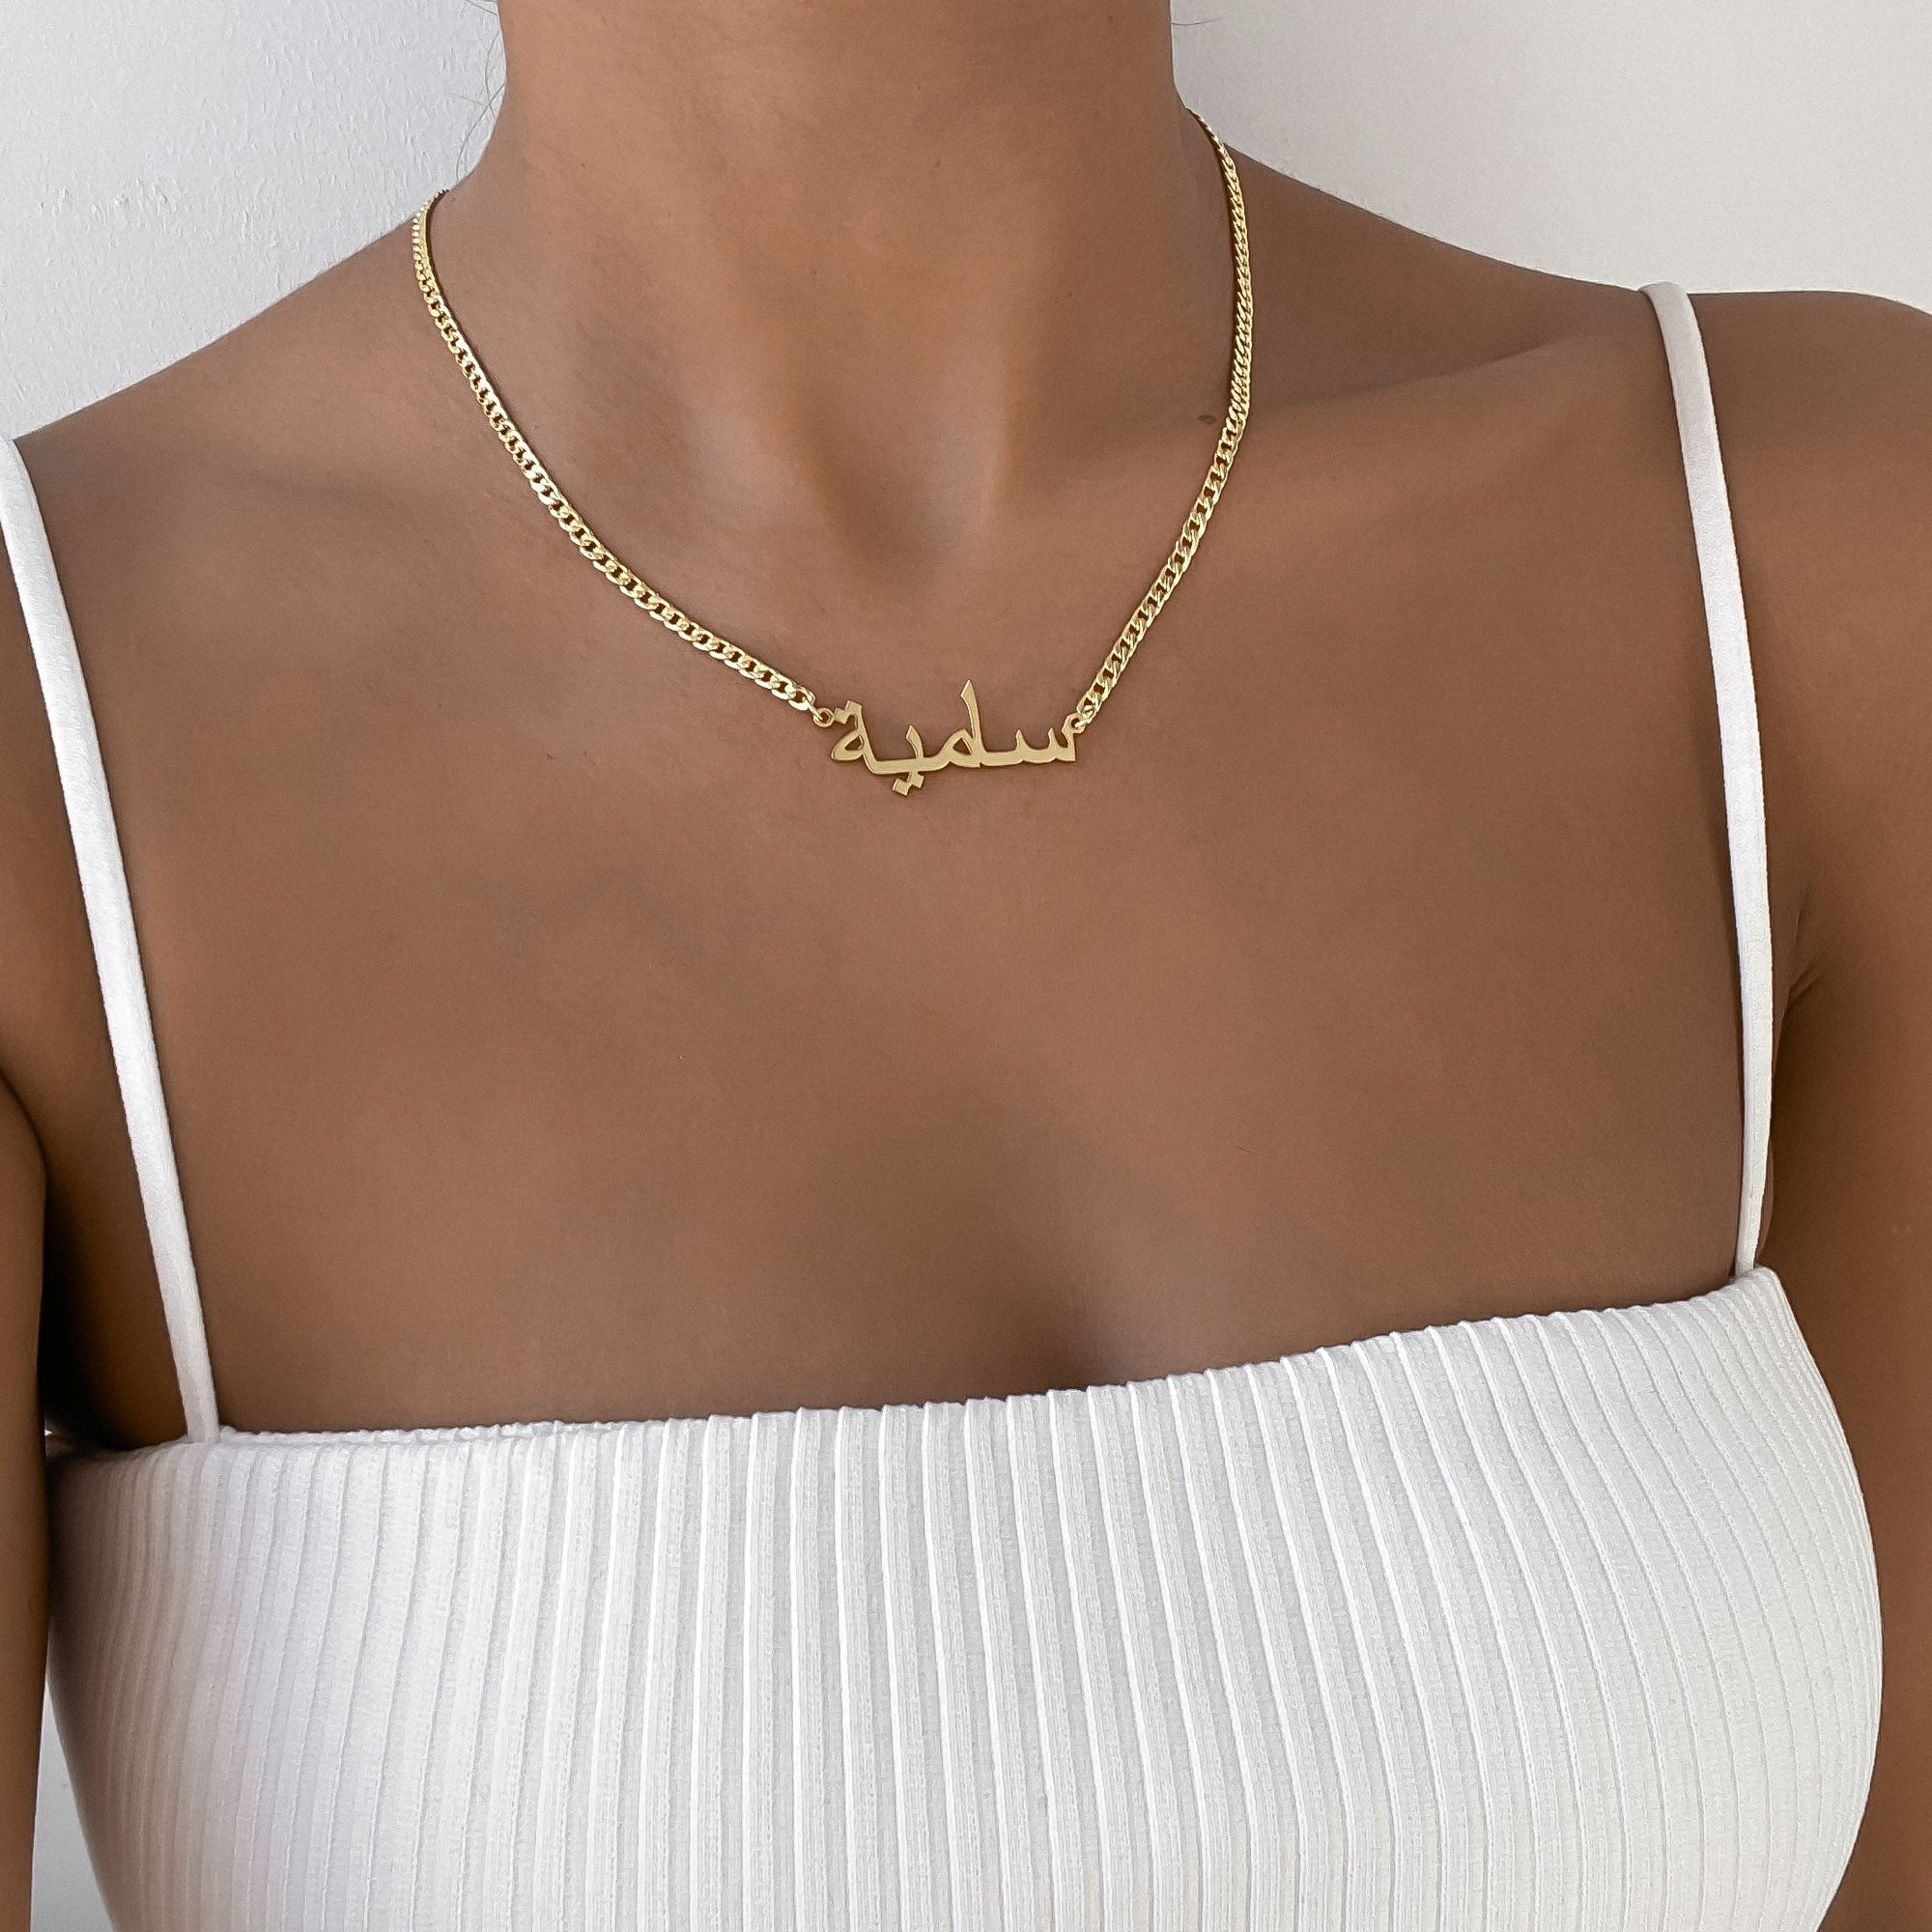 A woman wearing a white strappy top and an Arabic name necklace